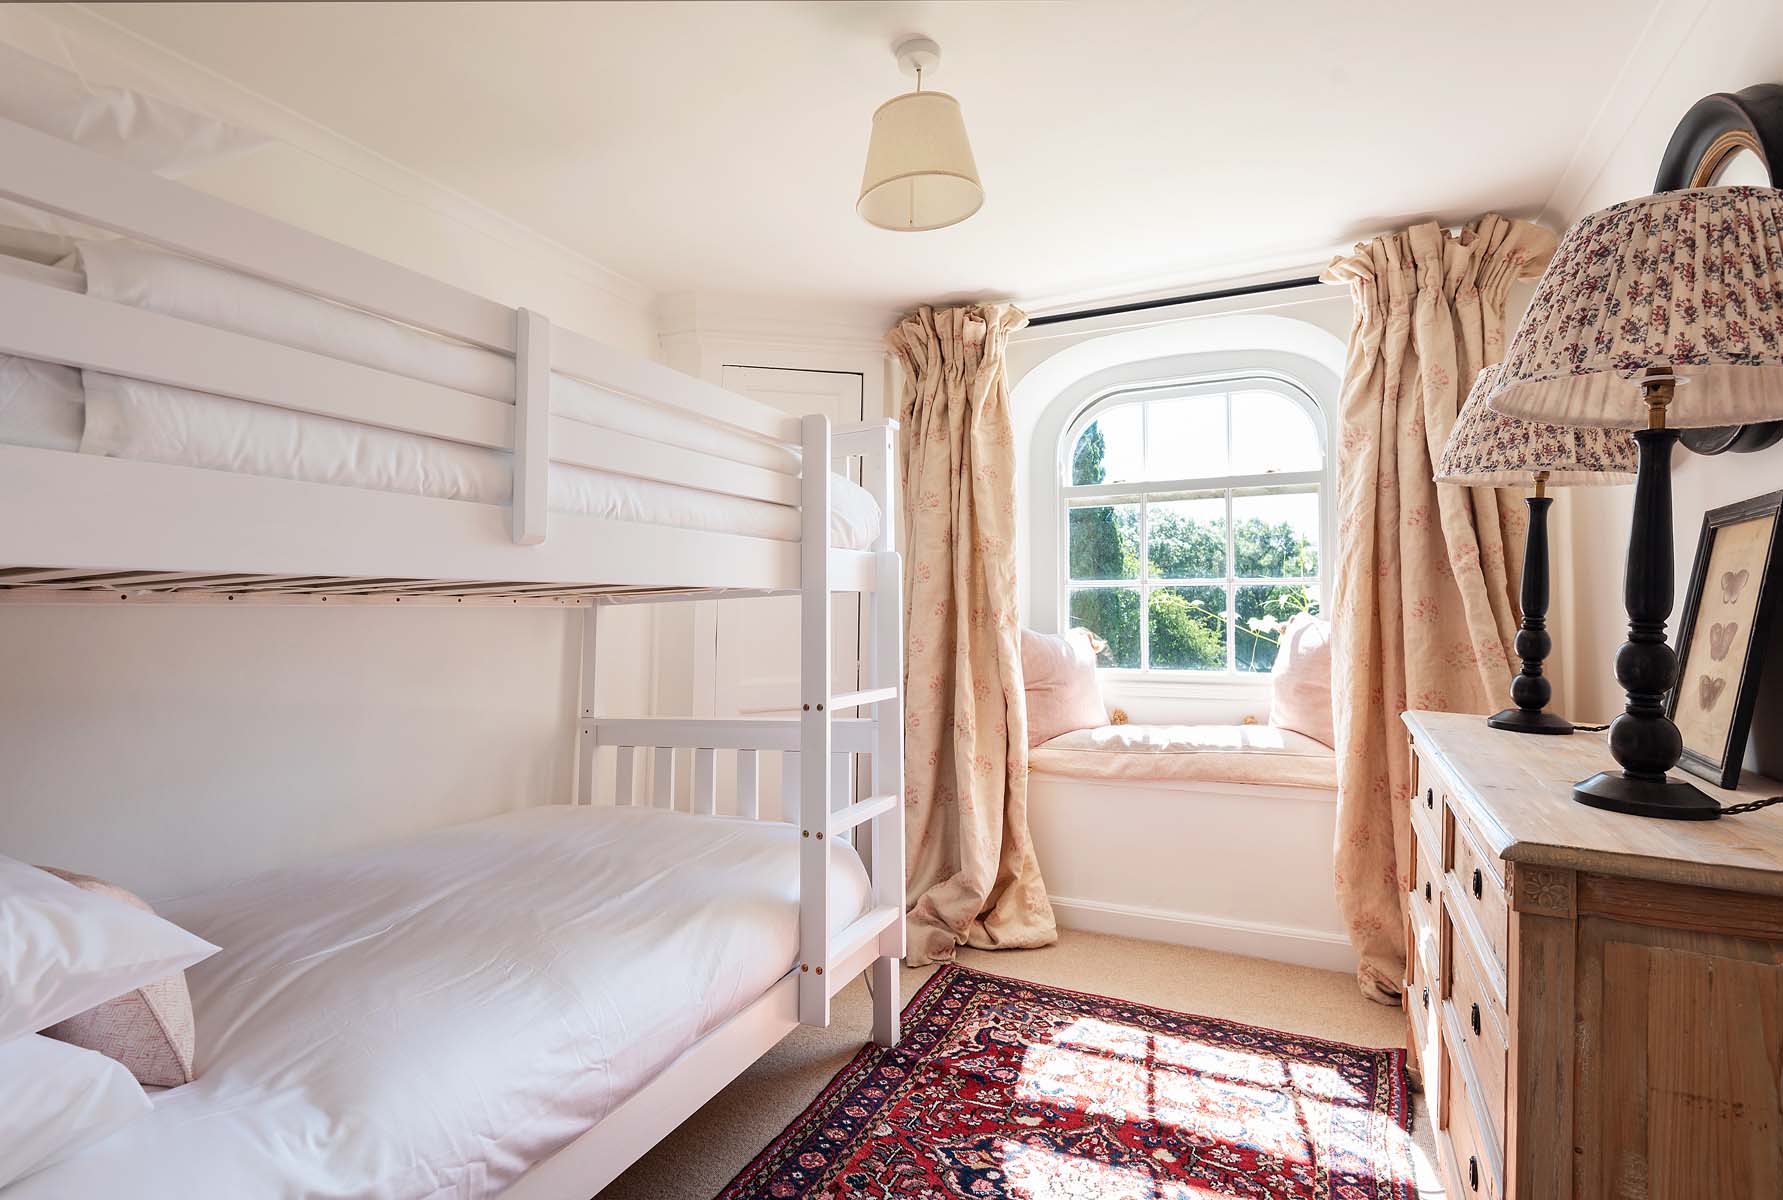 The bedroom with bunkbeds and garden view